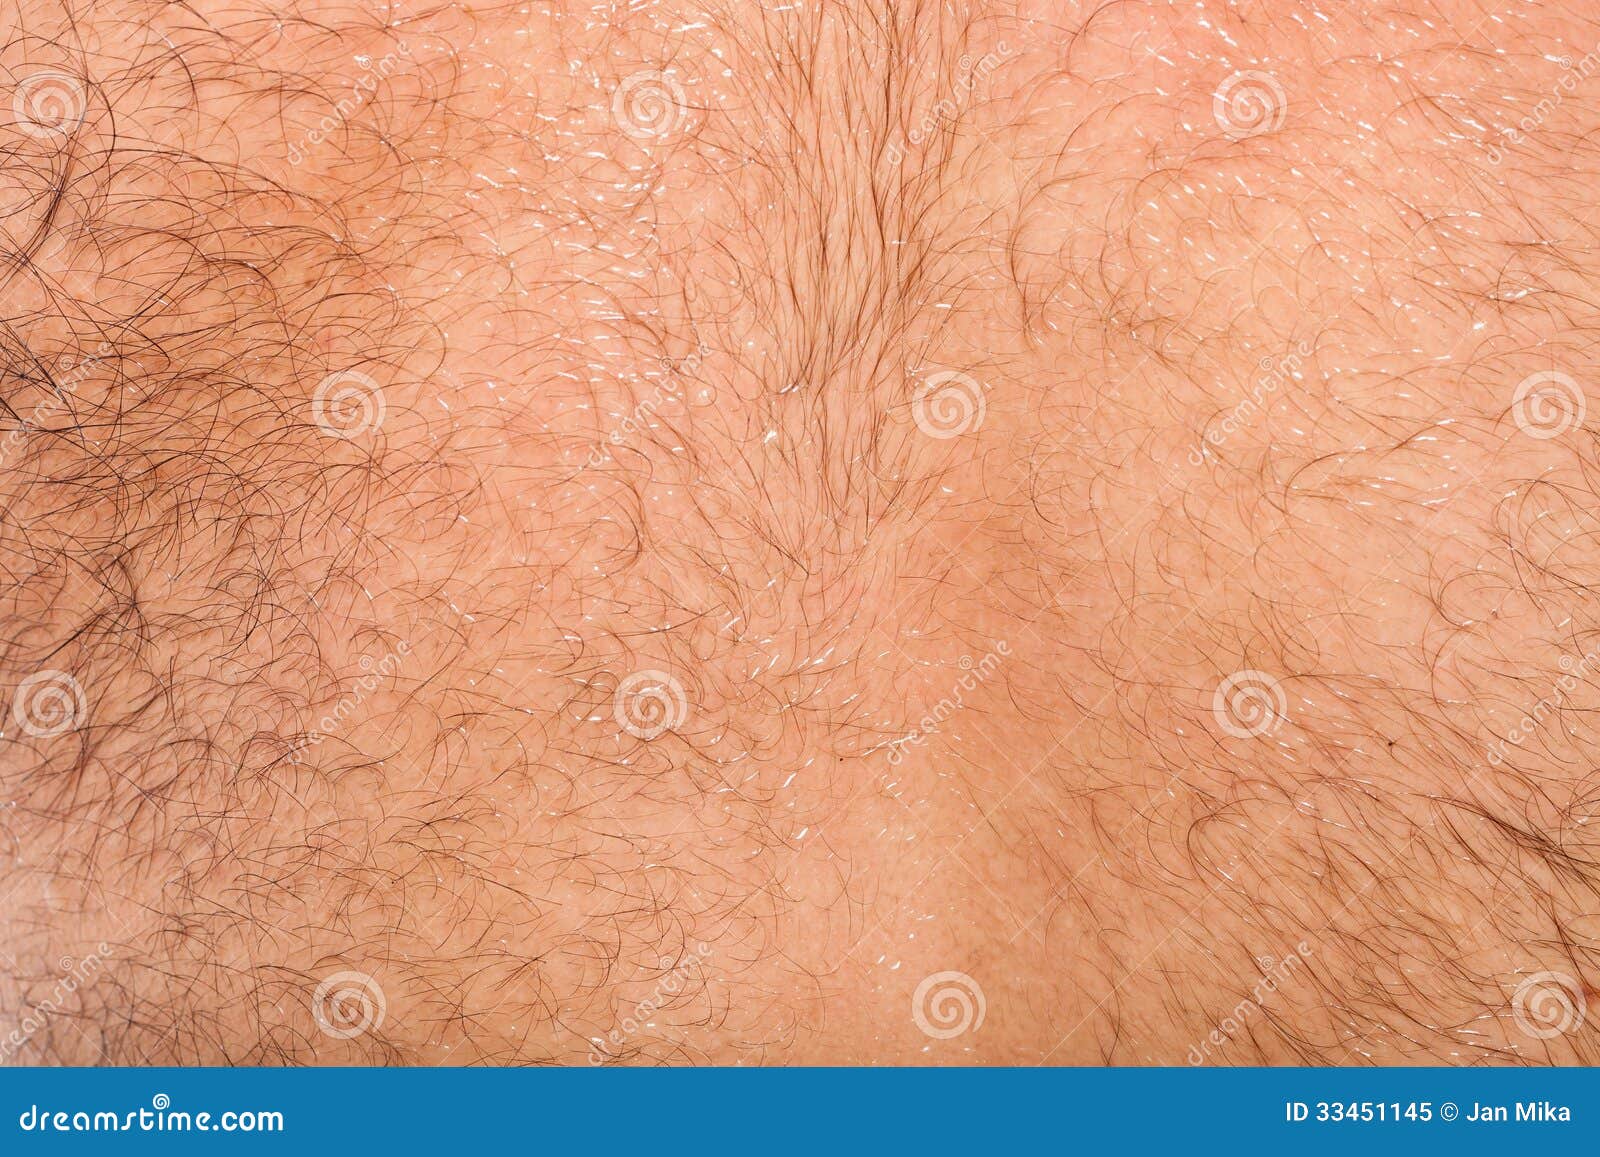 Detail Of Skin On Male Back Stock Image Image Of